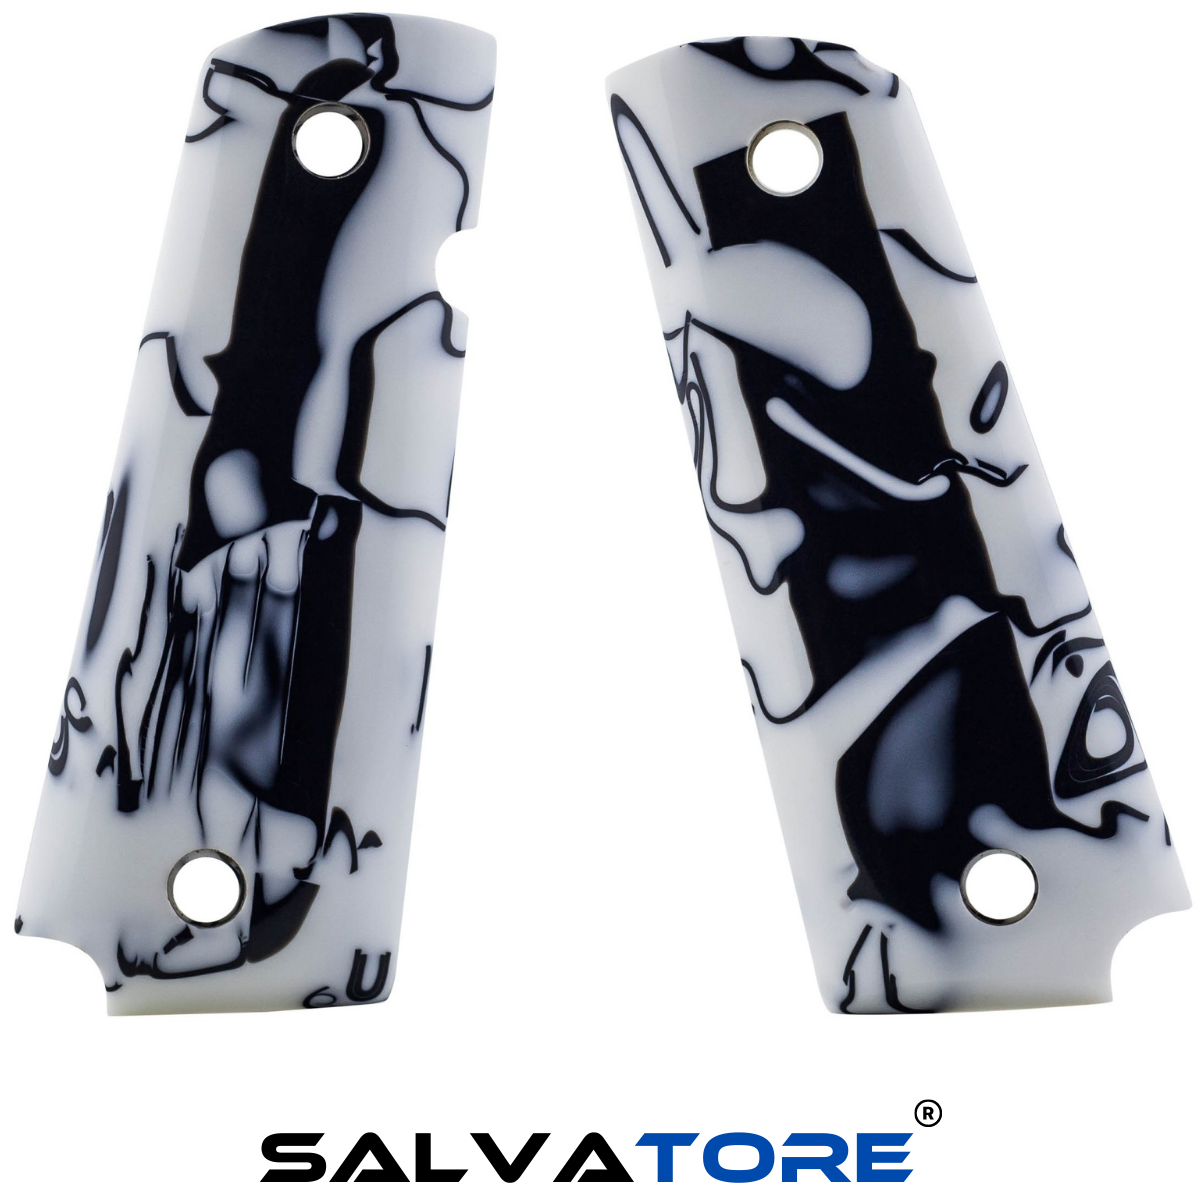 Salvatore Pistol Grips Revolver Grips For Colt 1911 Special Acrylic Gun Accessories Hunting Shooting